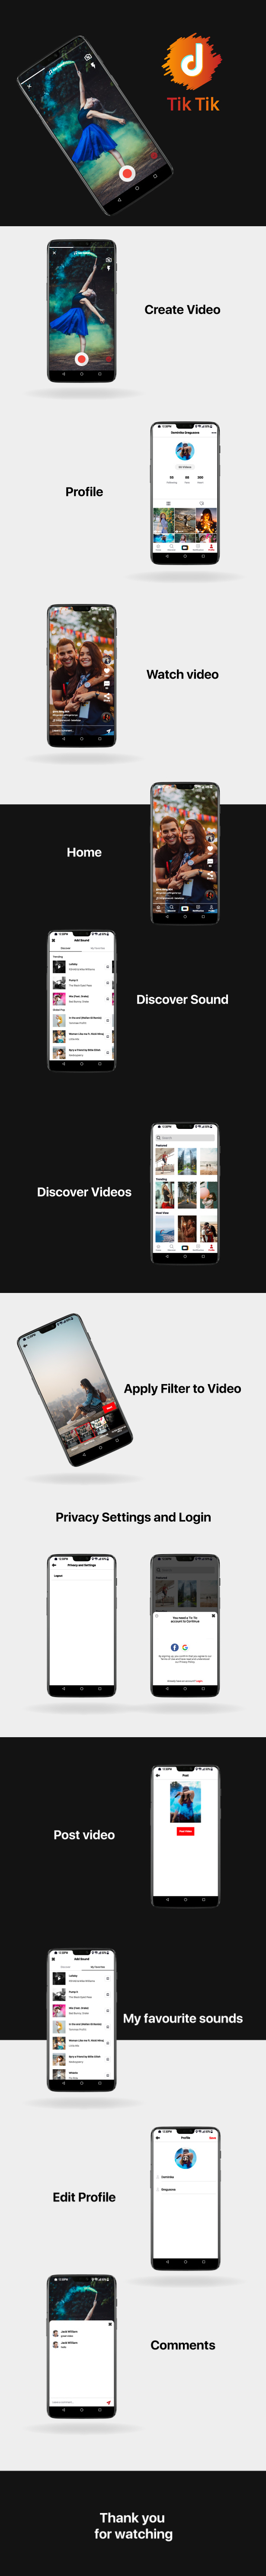 TicTic -  Android media app for creating and sharing short videos v2.4 - 4